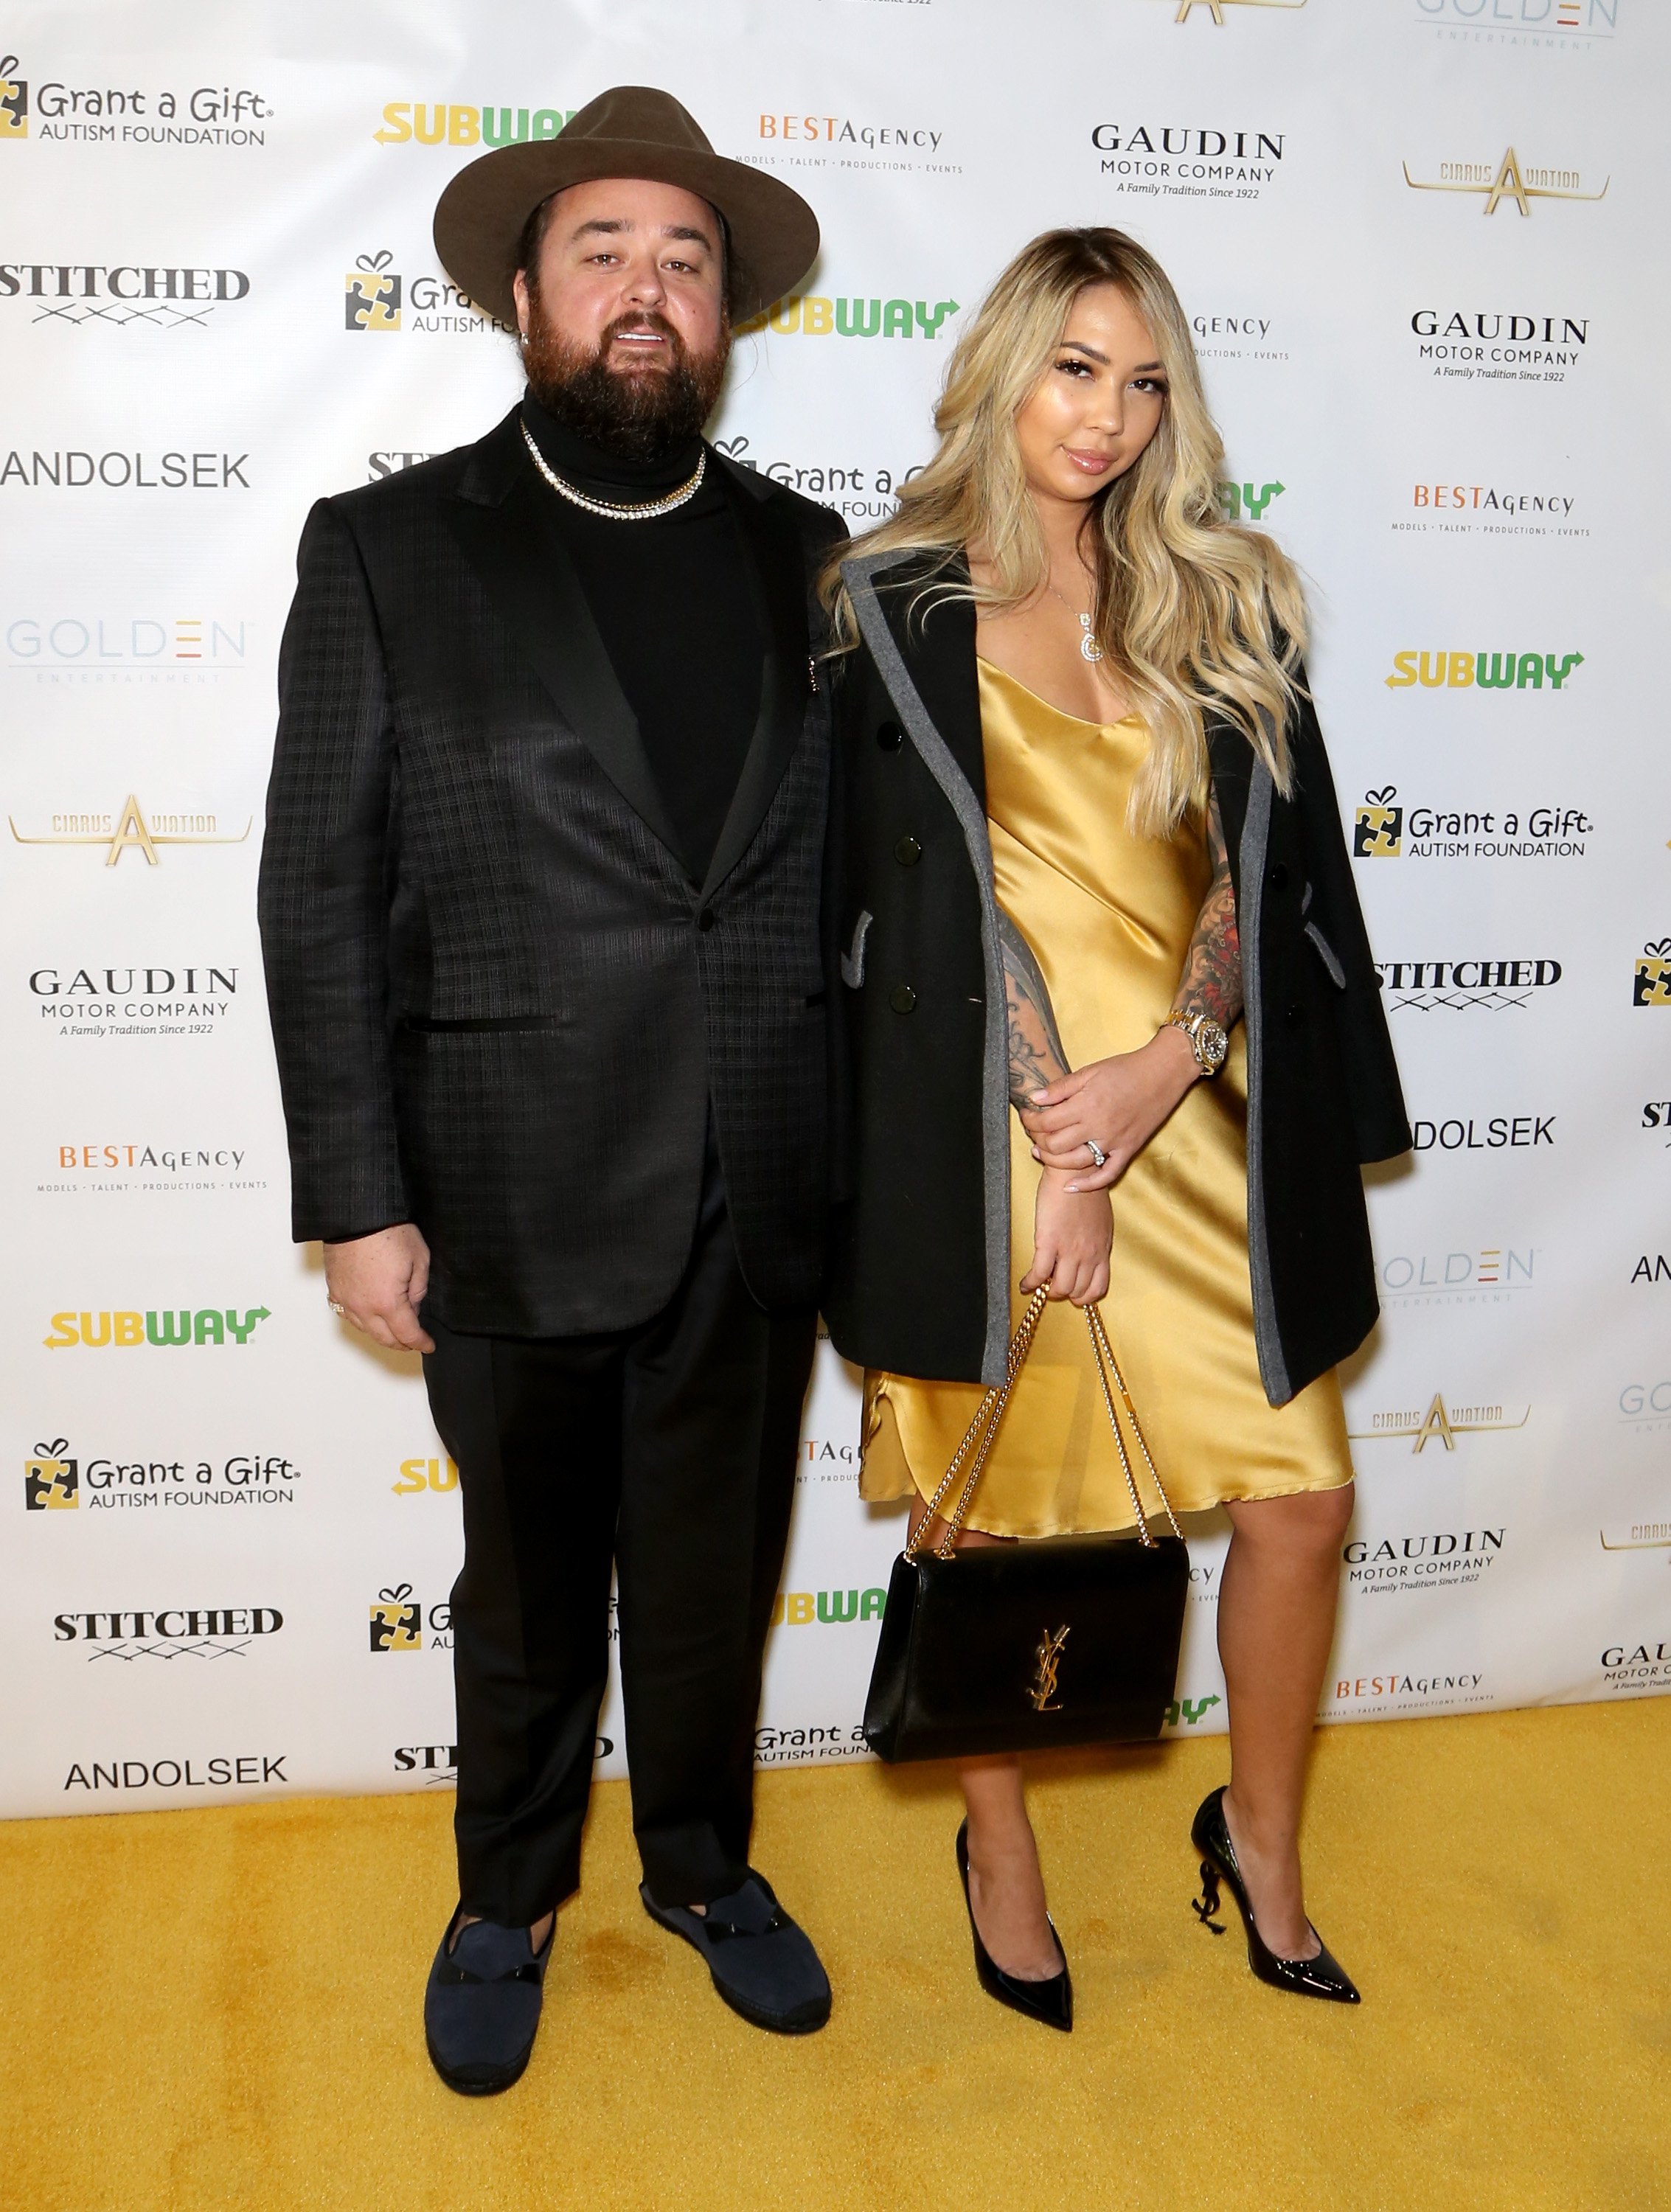 Austin "Chumlee" Russell and Olivia Rademann attends the Grant a Gift Autism Foundation's ninth annual Fashion for Autism gala "A Golden Night" at T-Mobile Arena on October 25, 2018, in Las Vegas, Nevada. | Source: Getty Images